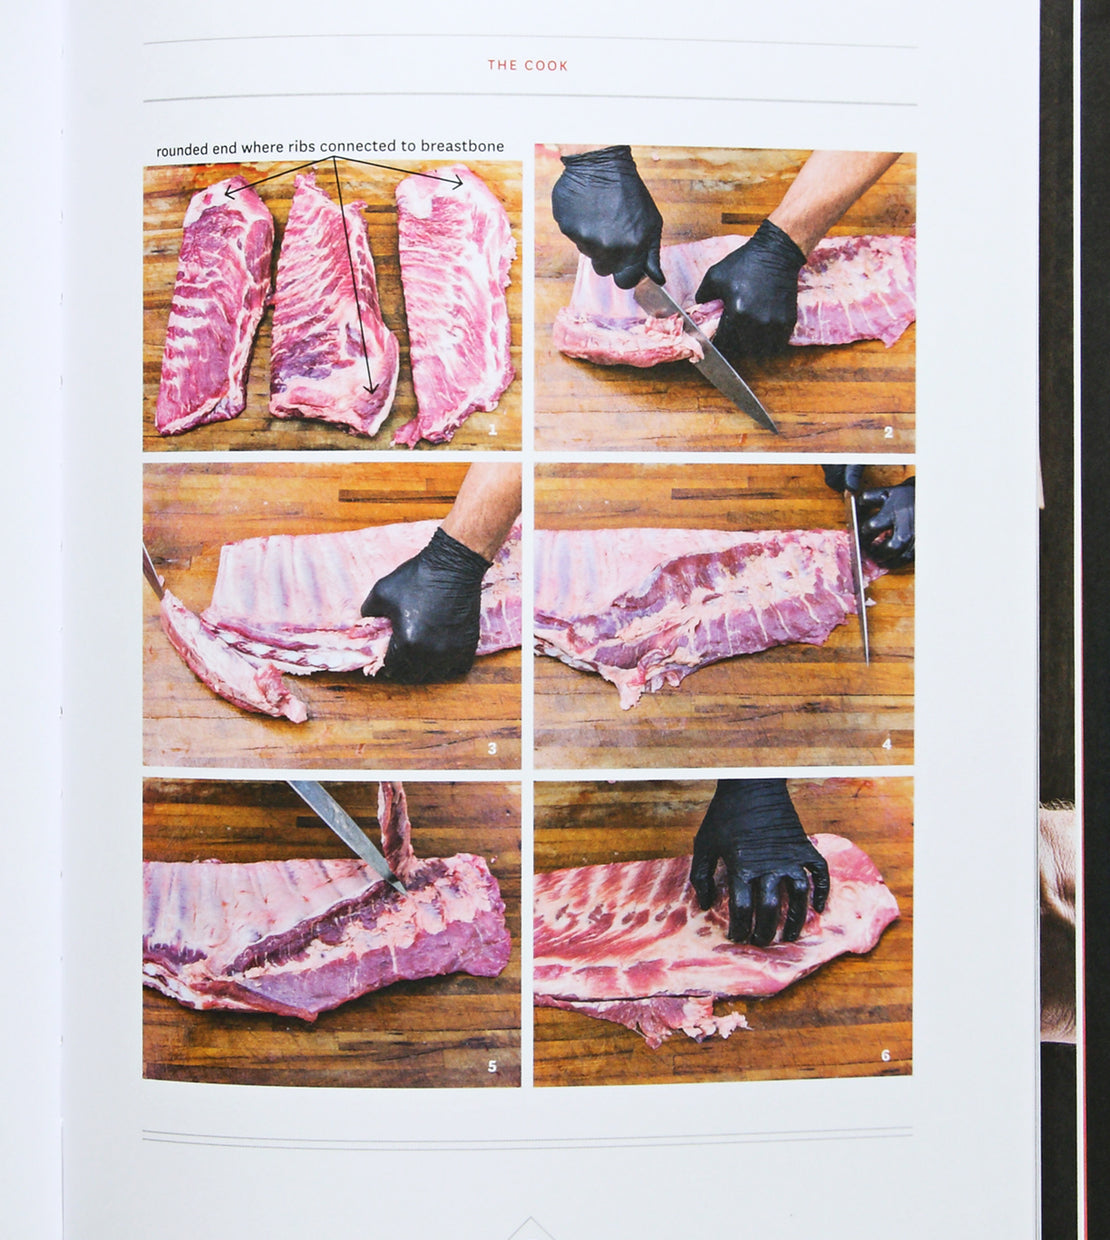 Franklin Barbecue: A Meat Smoking Manifesto - Aaron Franklin & Jordan Mackay - Bookstore - STAG Provisions - Gift - Books